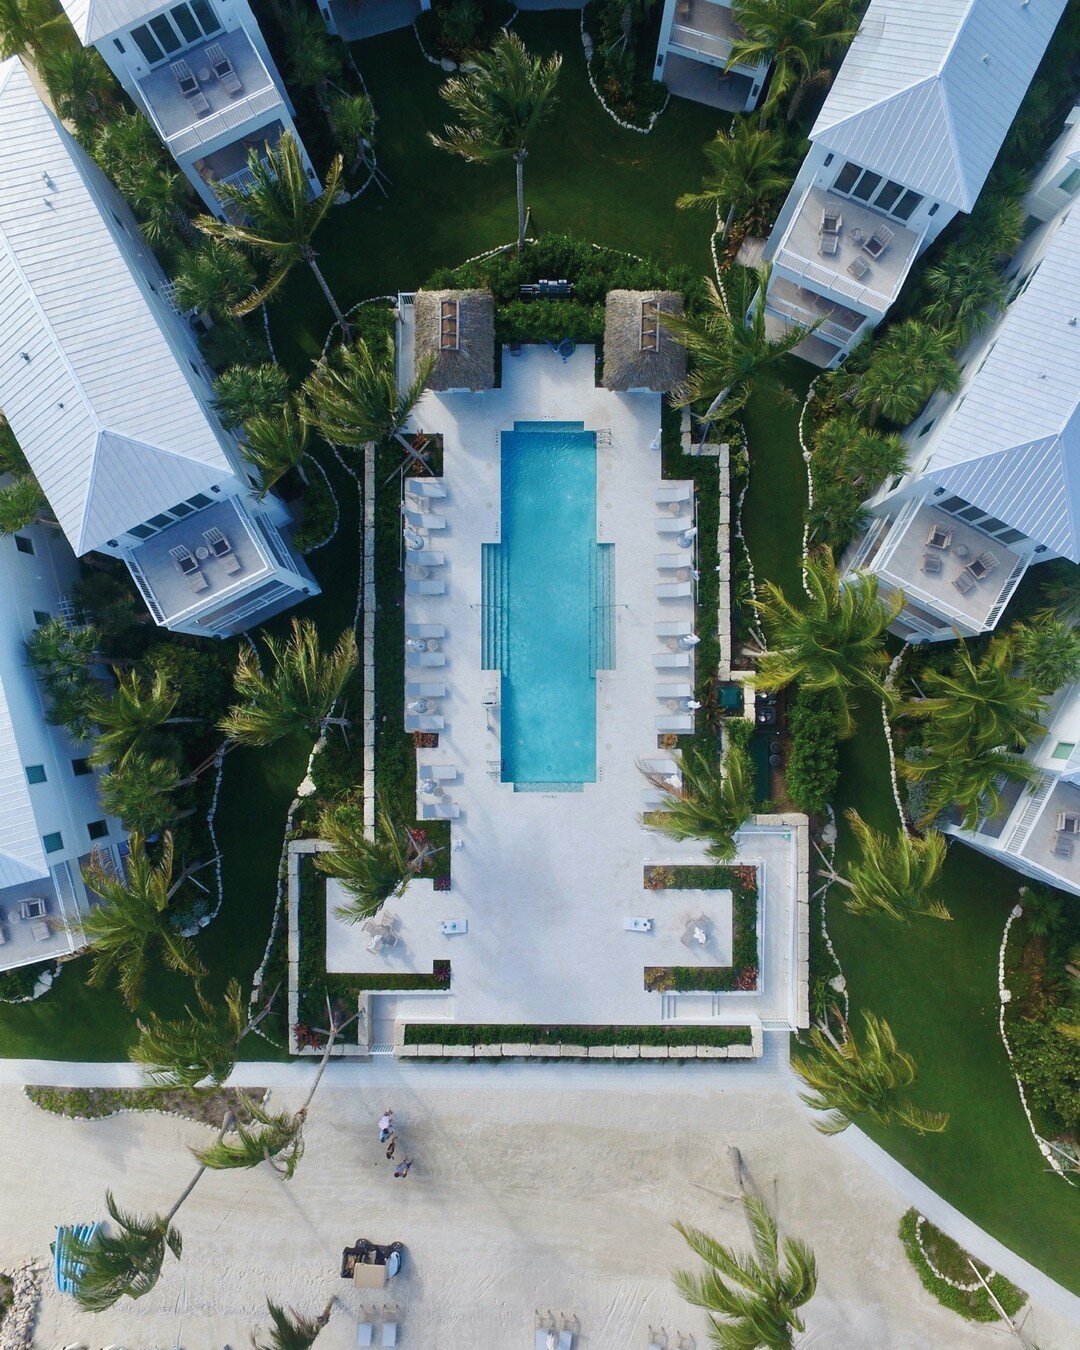 Aerial views of tranquility.⠀⠀⠀⠀⠀⠀⠀⠀⠀
⠀⠀⠀⠀⠀⠀⠀⠀⠀
Share in the splendor of The Florida Keys at The Islands of Islamorada. ⠀⠀⠀⠀⠀⠀⠀⠀⠀
⠀⠀⠀⠀⠀⠀⠀⠀⠀
.⠀⠀⠀⠀⠀⠀⠀⠀⠀
.⠀⠀⠀⠀⠀⠀⠀⠀⠀
.⠀⠀⠀⠀⠀⠀⠀⠀⠀
#TheIslandsofIslamorada #Islamorada #Florida #VisitFlorida #FloridaKeys #KeyW